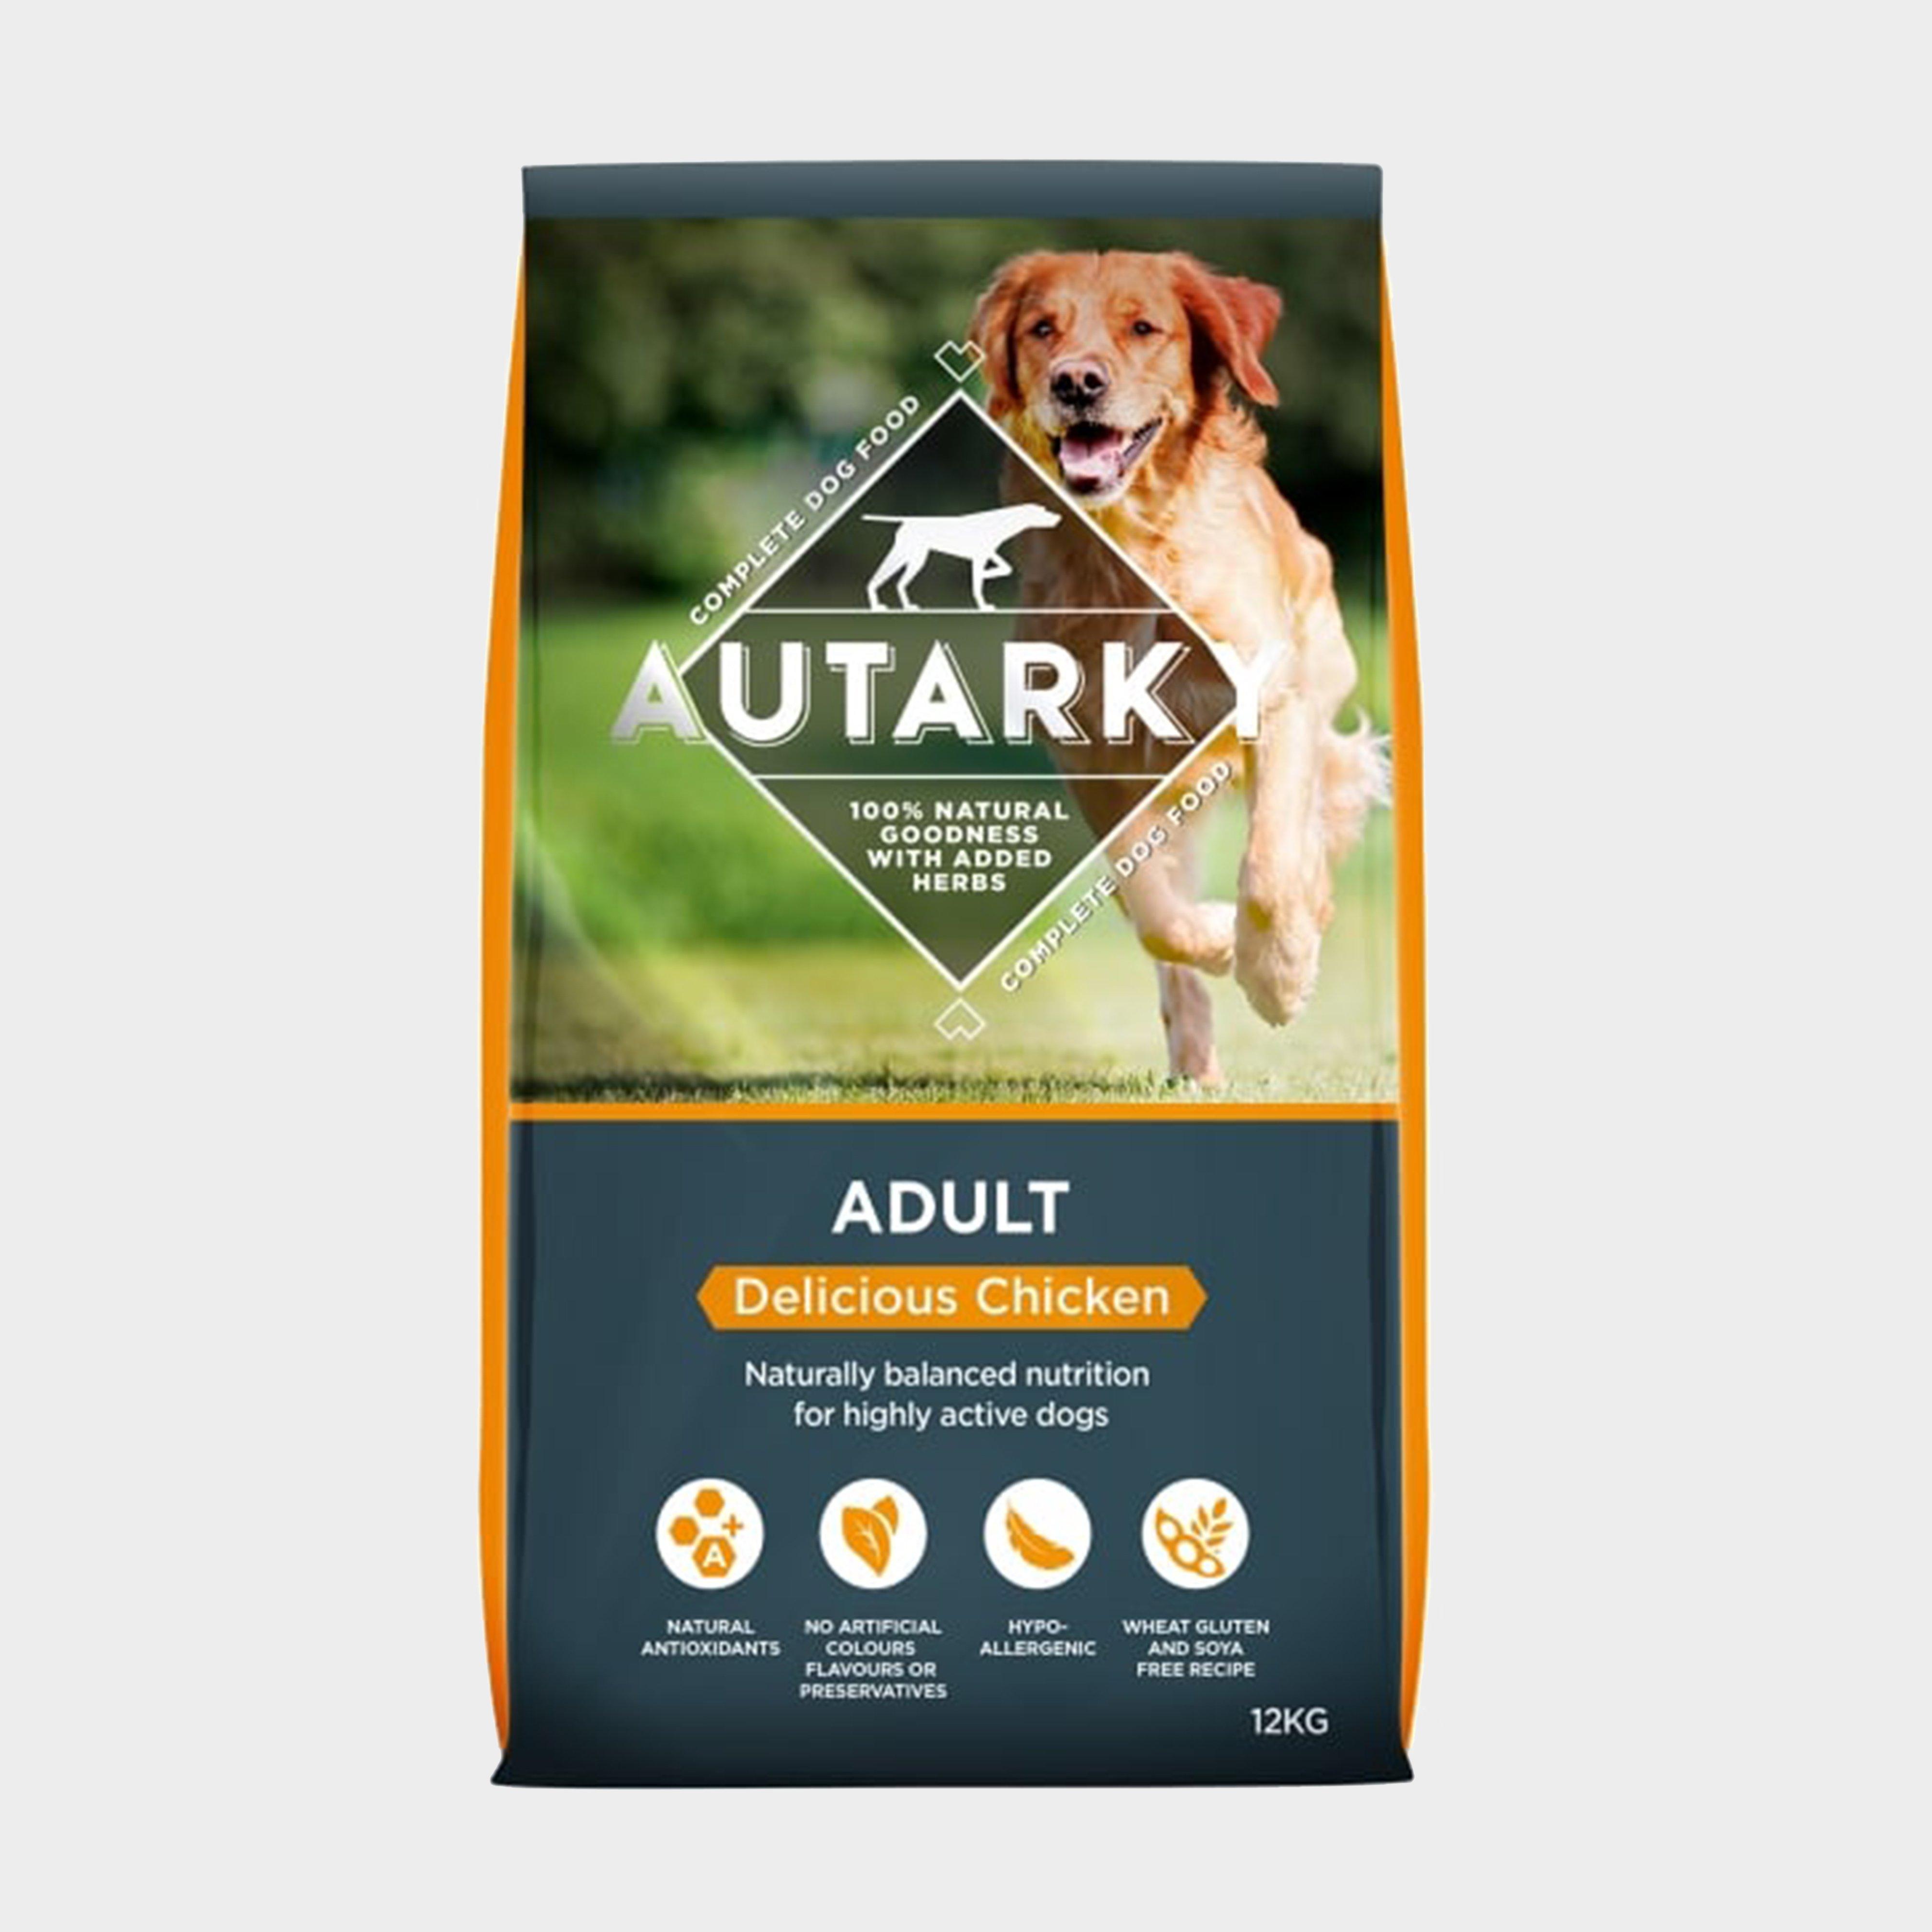 Autarky Adult Delicious Chicken Dog Food 12kg